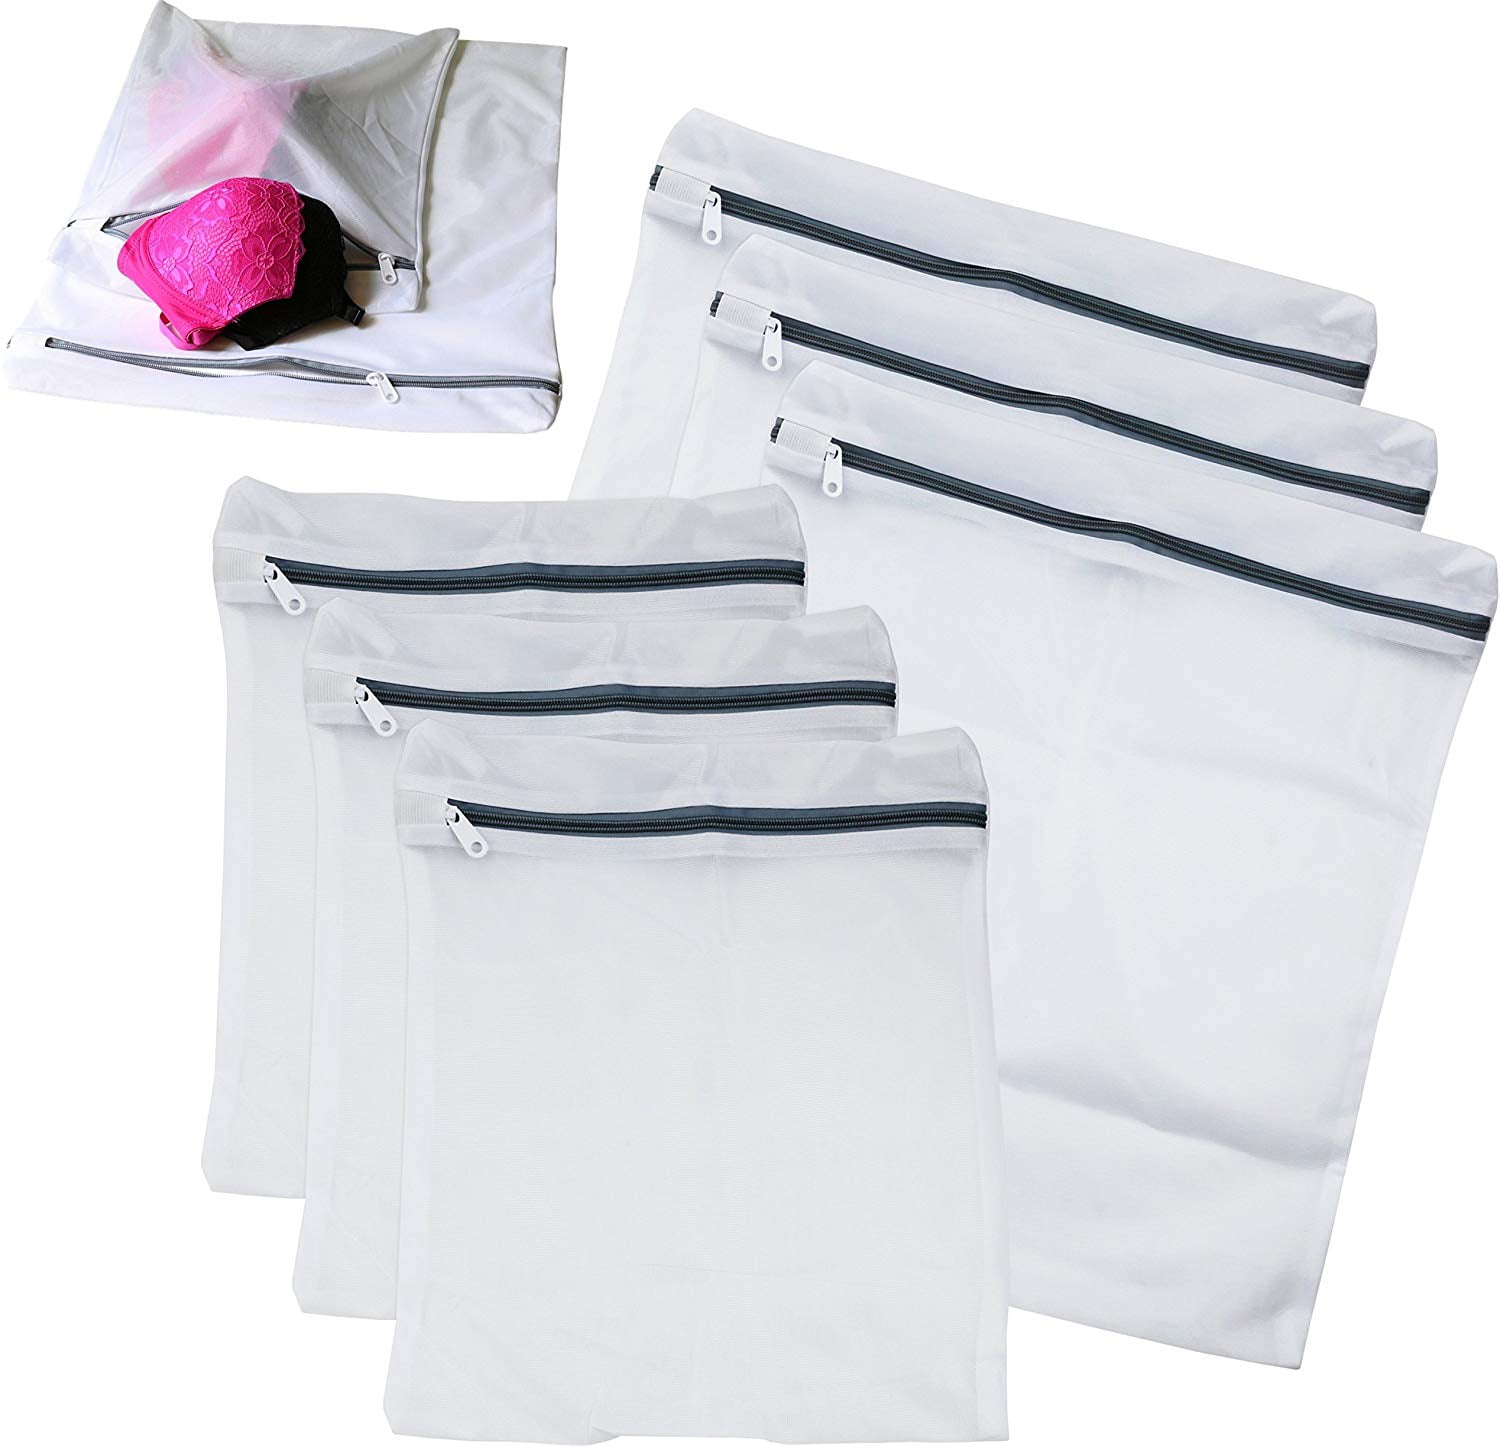 Laundry Science Premium Bra Wash Bag for Bras Lingerie and Delicates Set of 3 